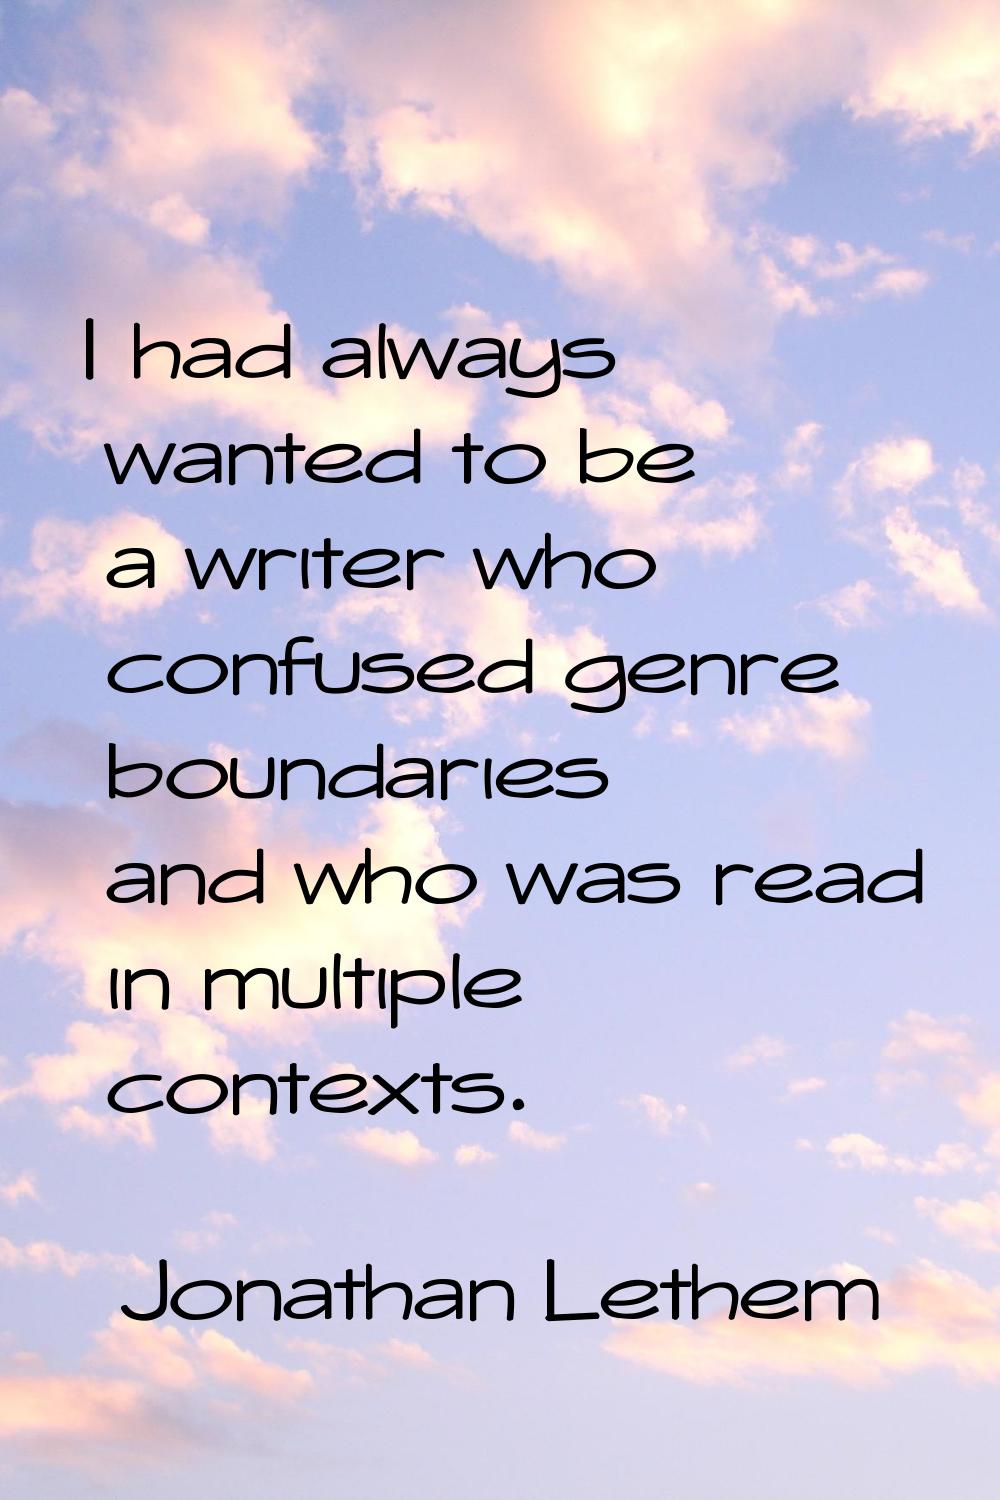 I had always wanted to be a writer who confused genre boundaries and who was read in multiple conte